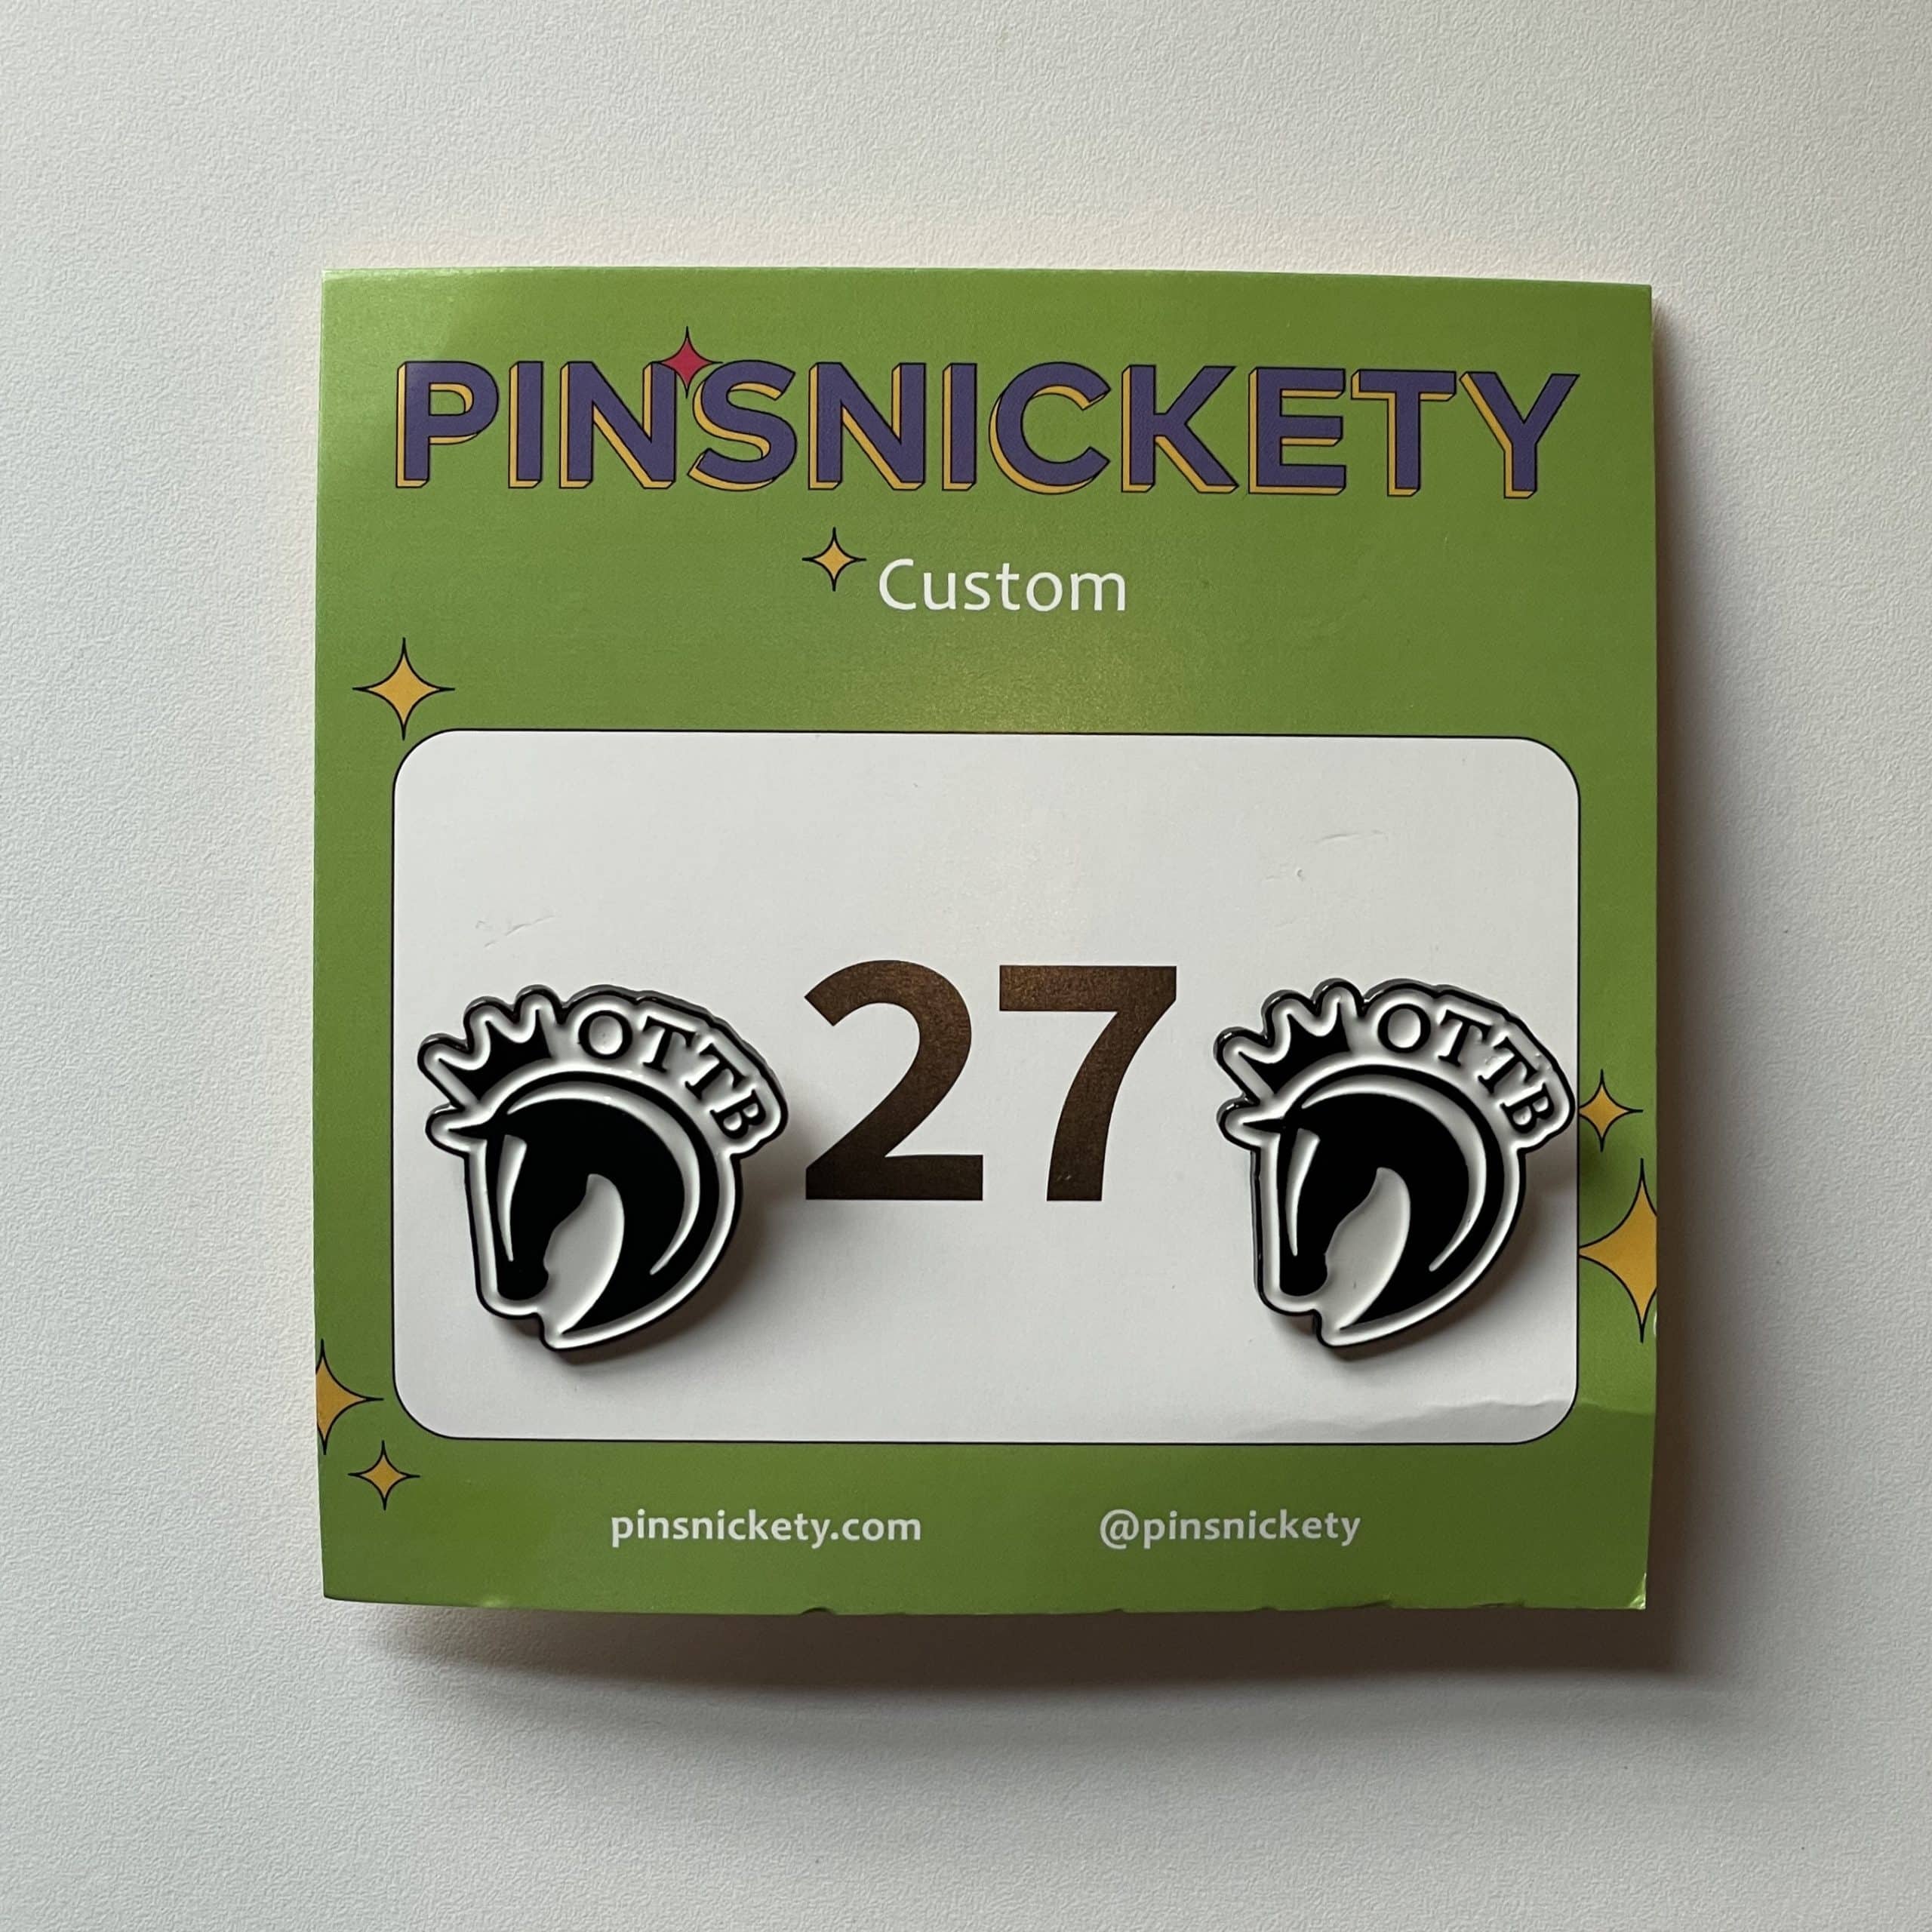 Featured image for “Pinsnickety OTTB Number Pins”